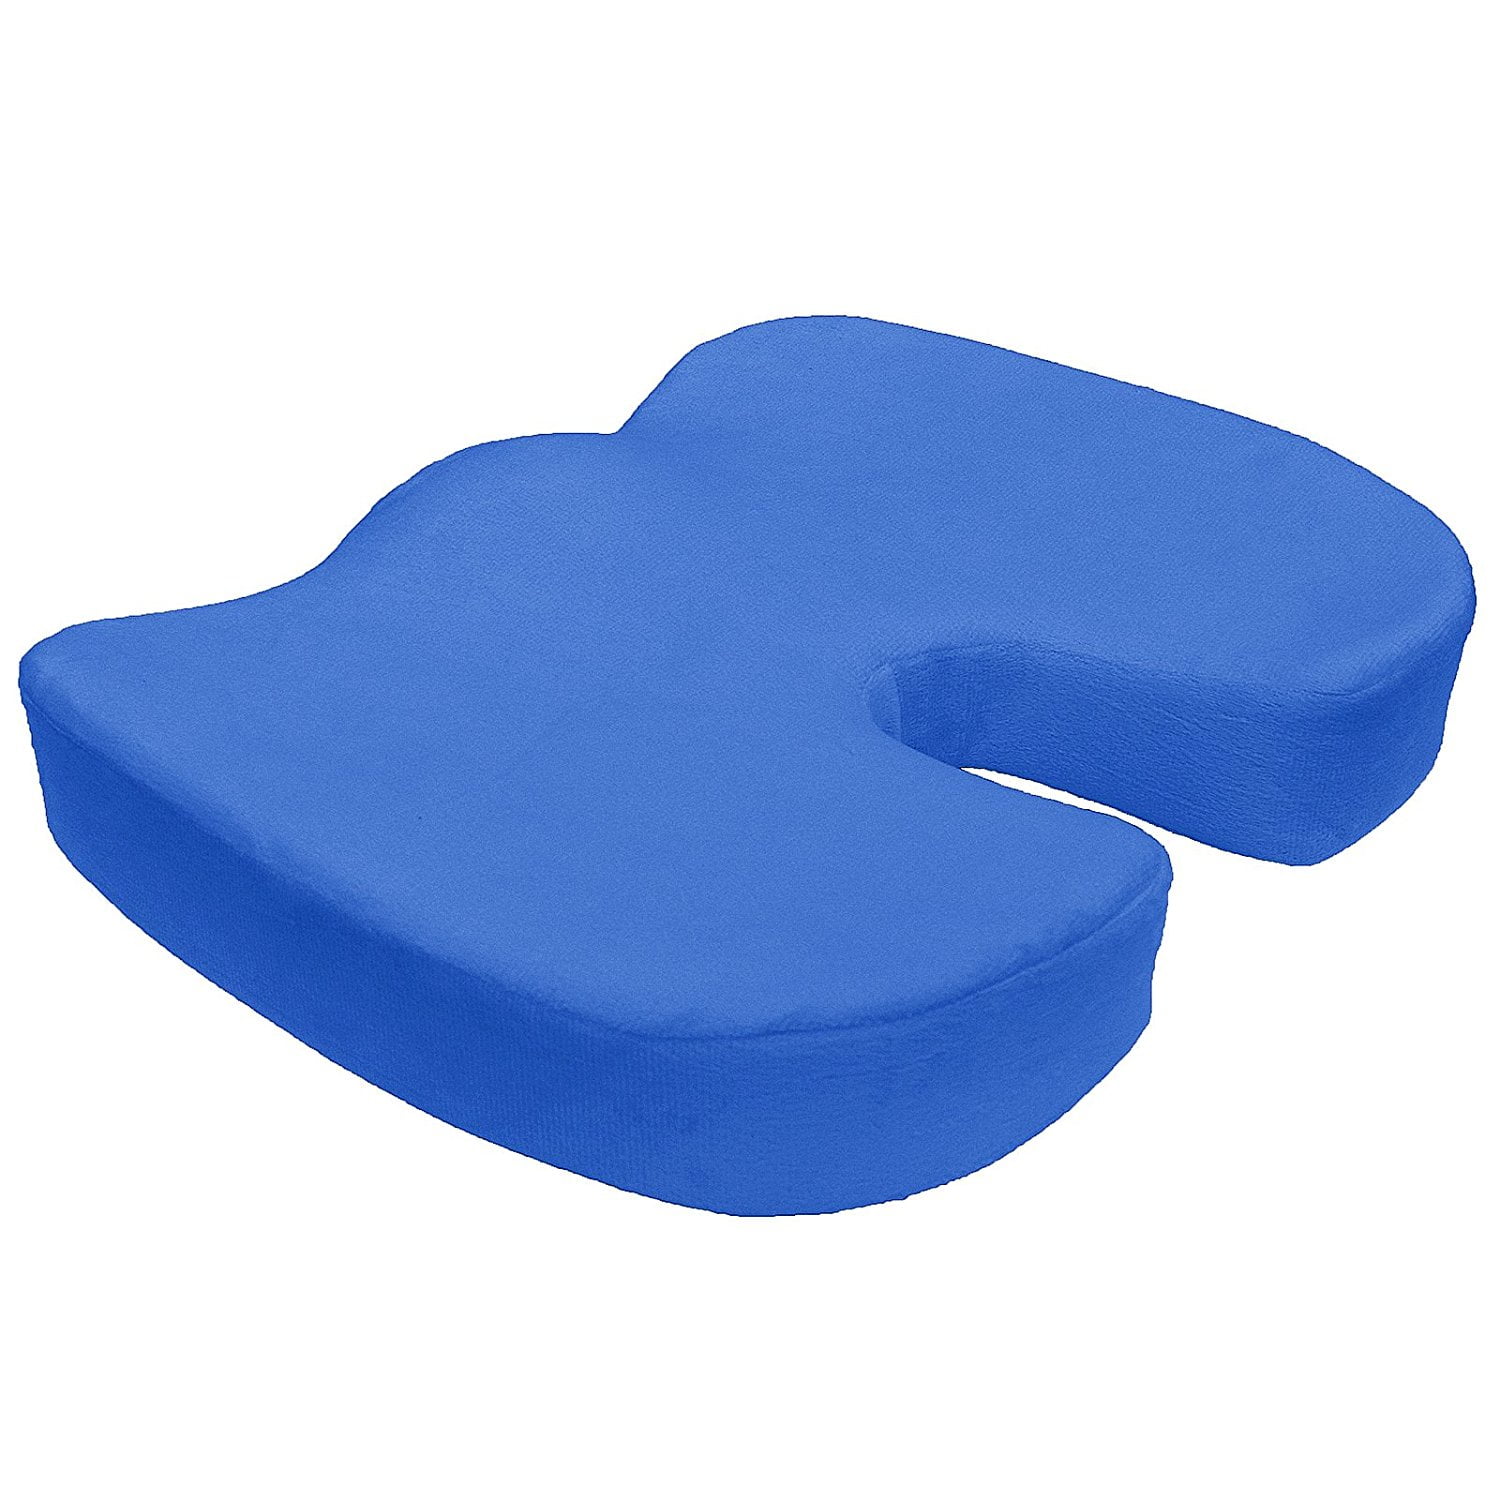 Pootack Seat Cushion For Coccyx, Memory Foam Seat Cushion